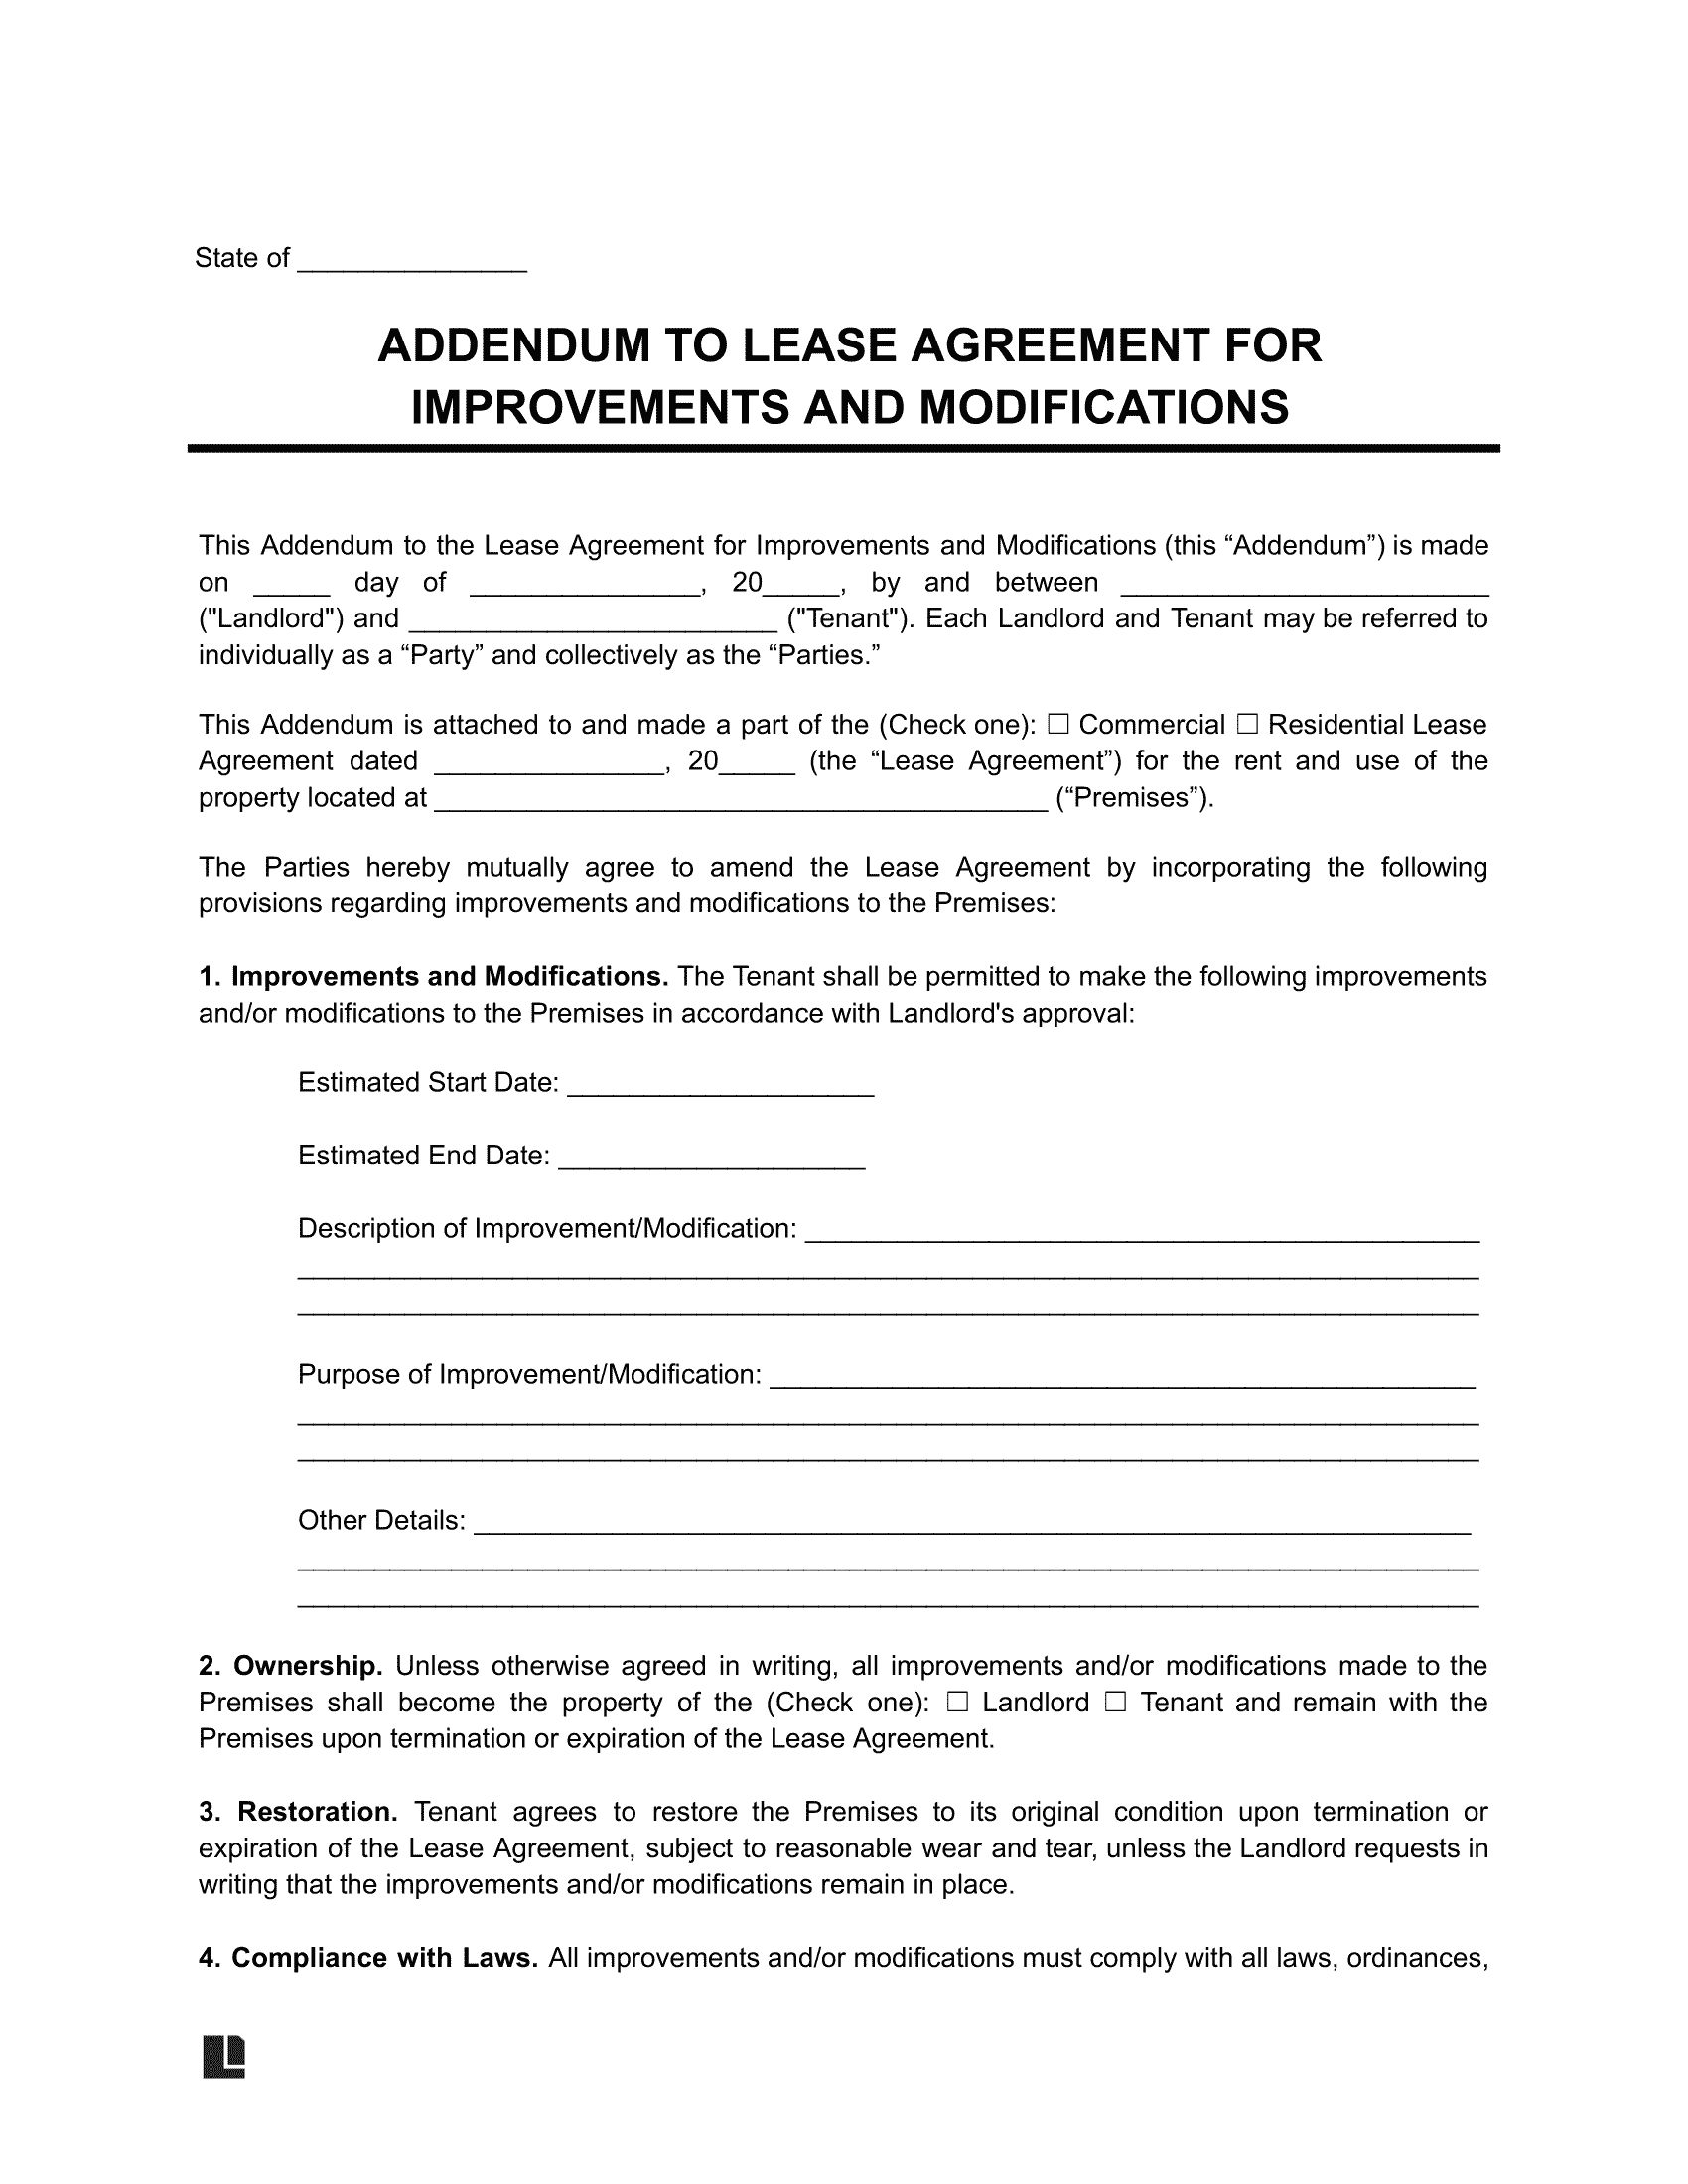 improvements and modifications lease addendum template